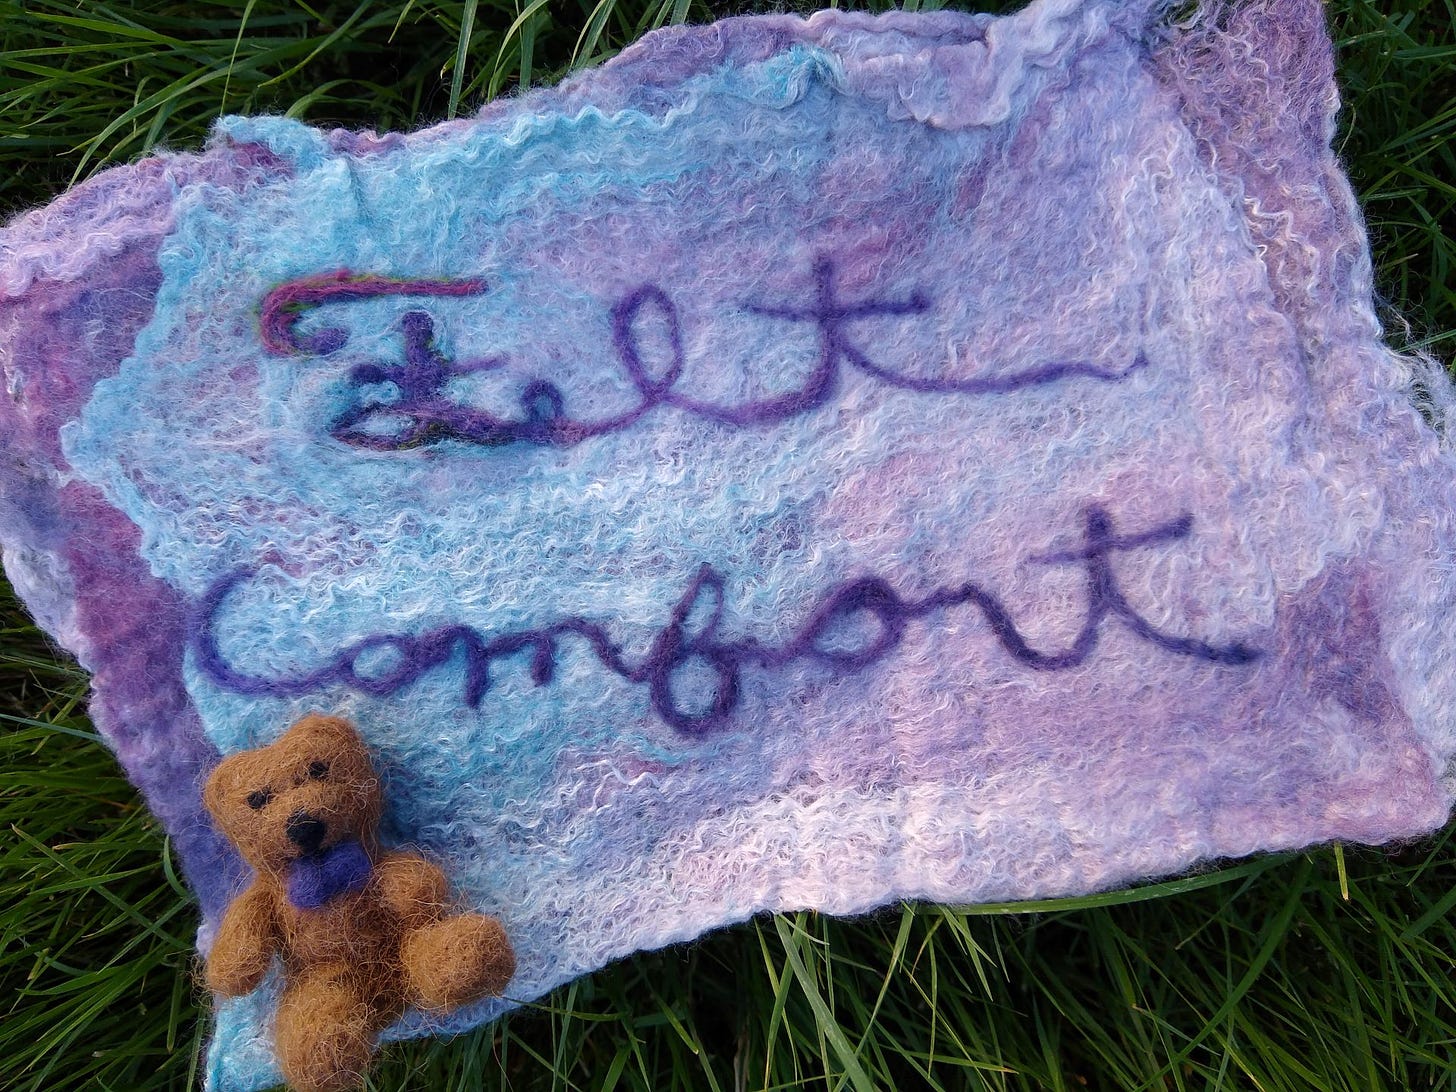 Small needle-felted teddy bear on a purple and blue piece of felt that says Felt Comfort in cursive, on top of some grass